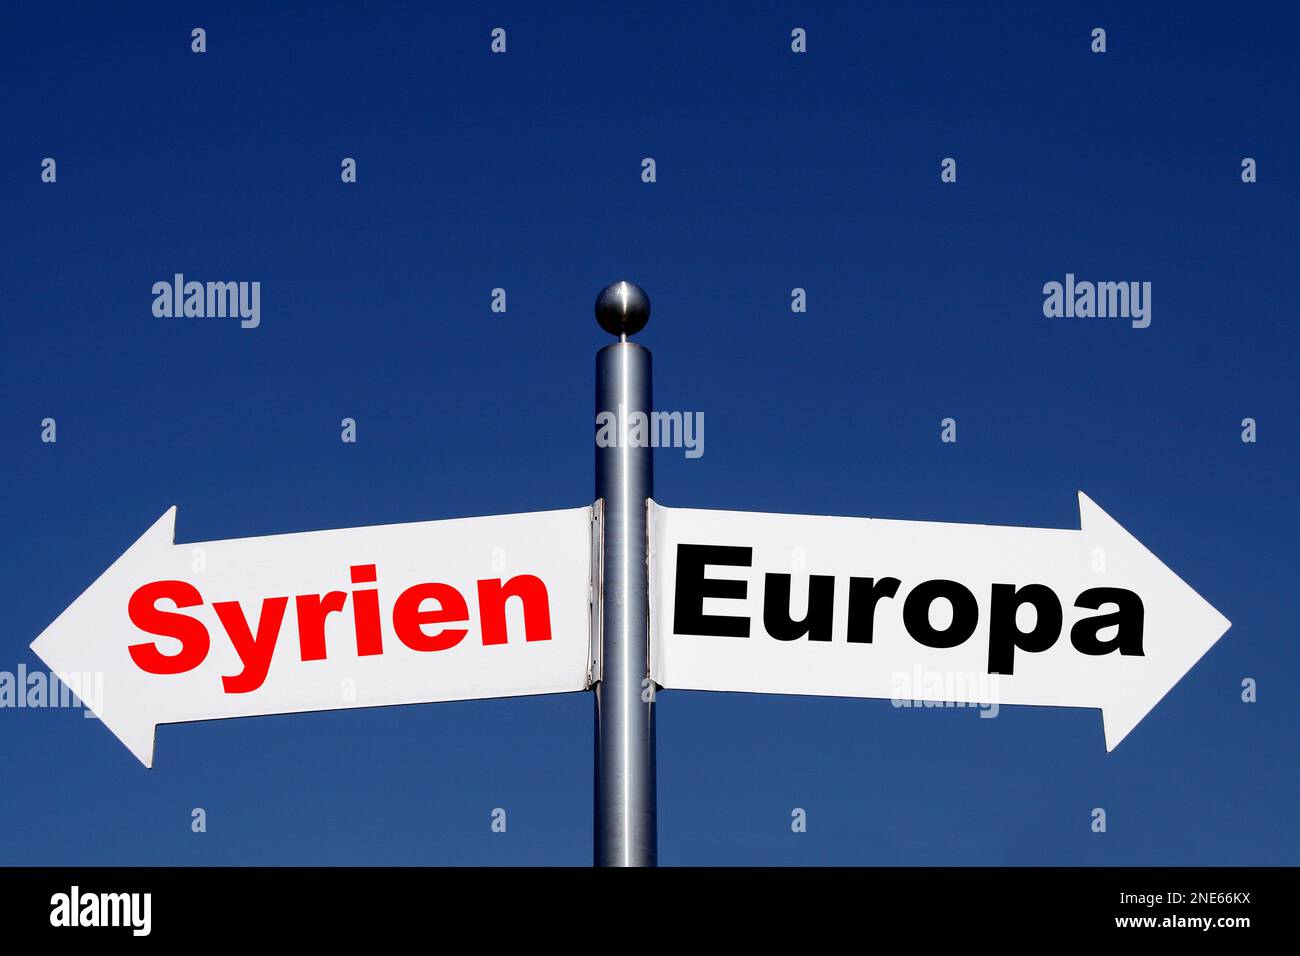 signposts pointing in different directions, options Syria - Europa Stock Photo